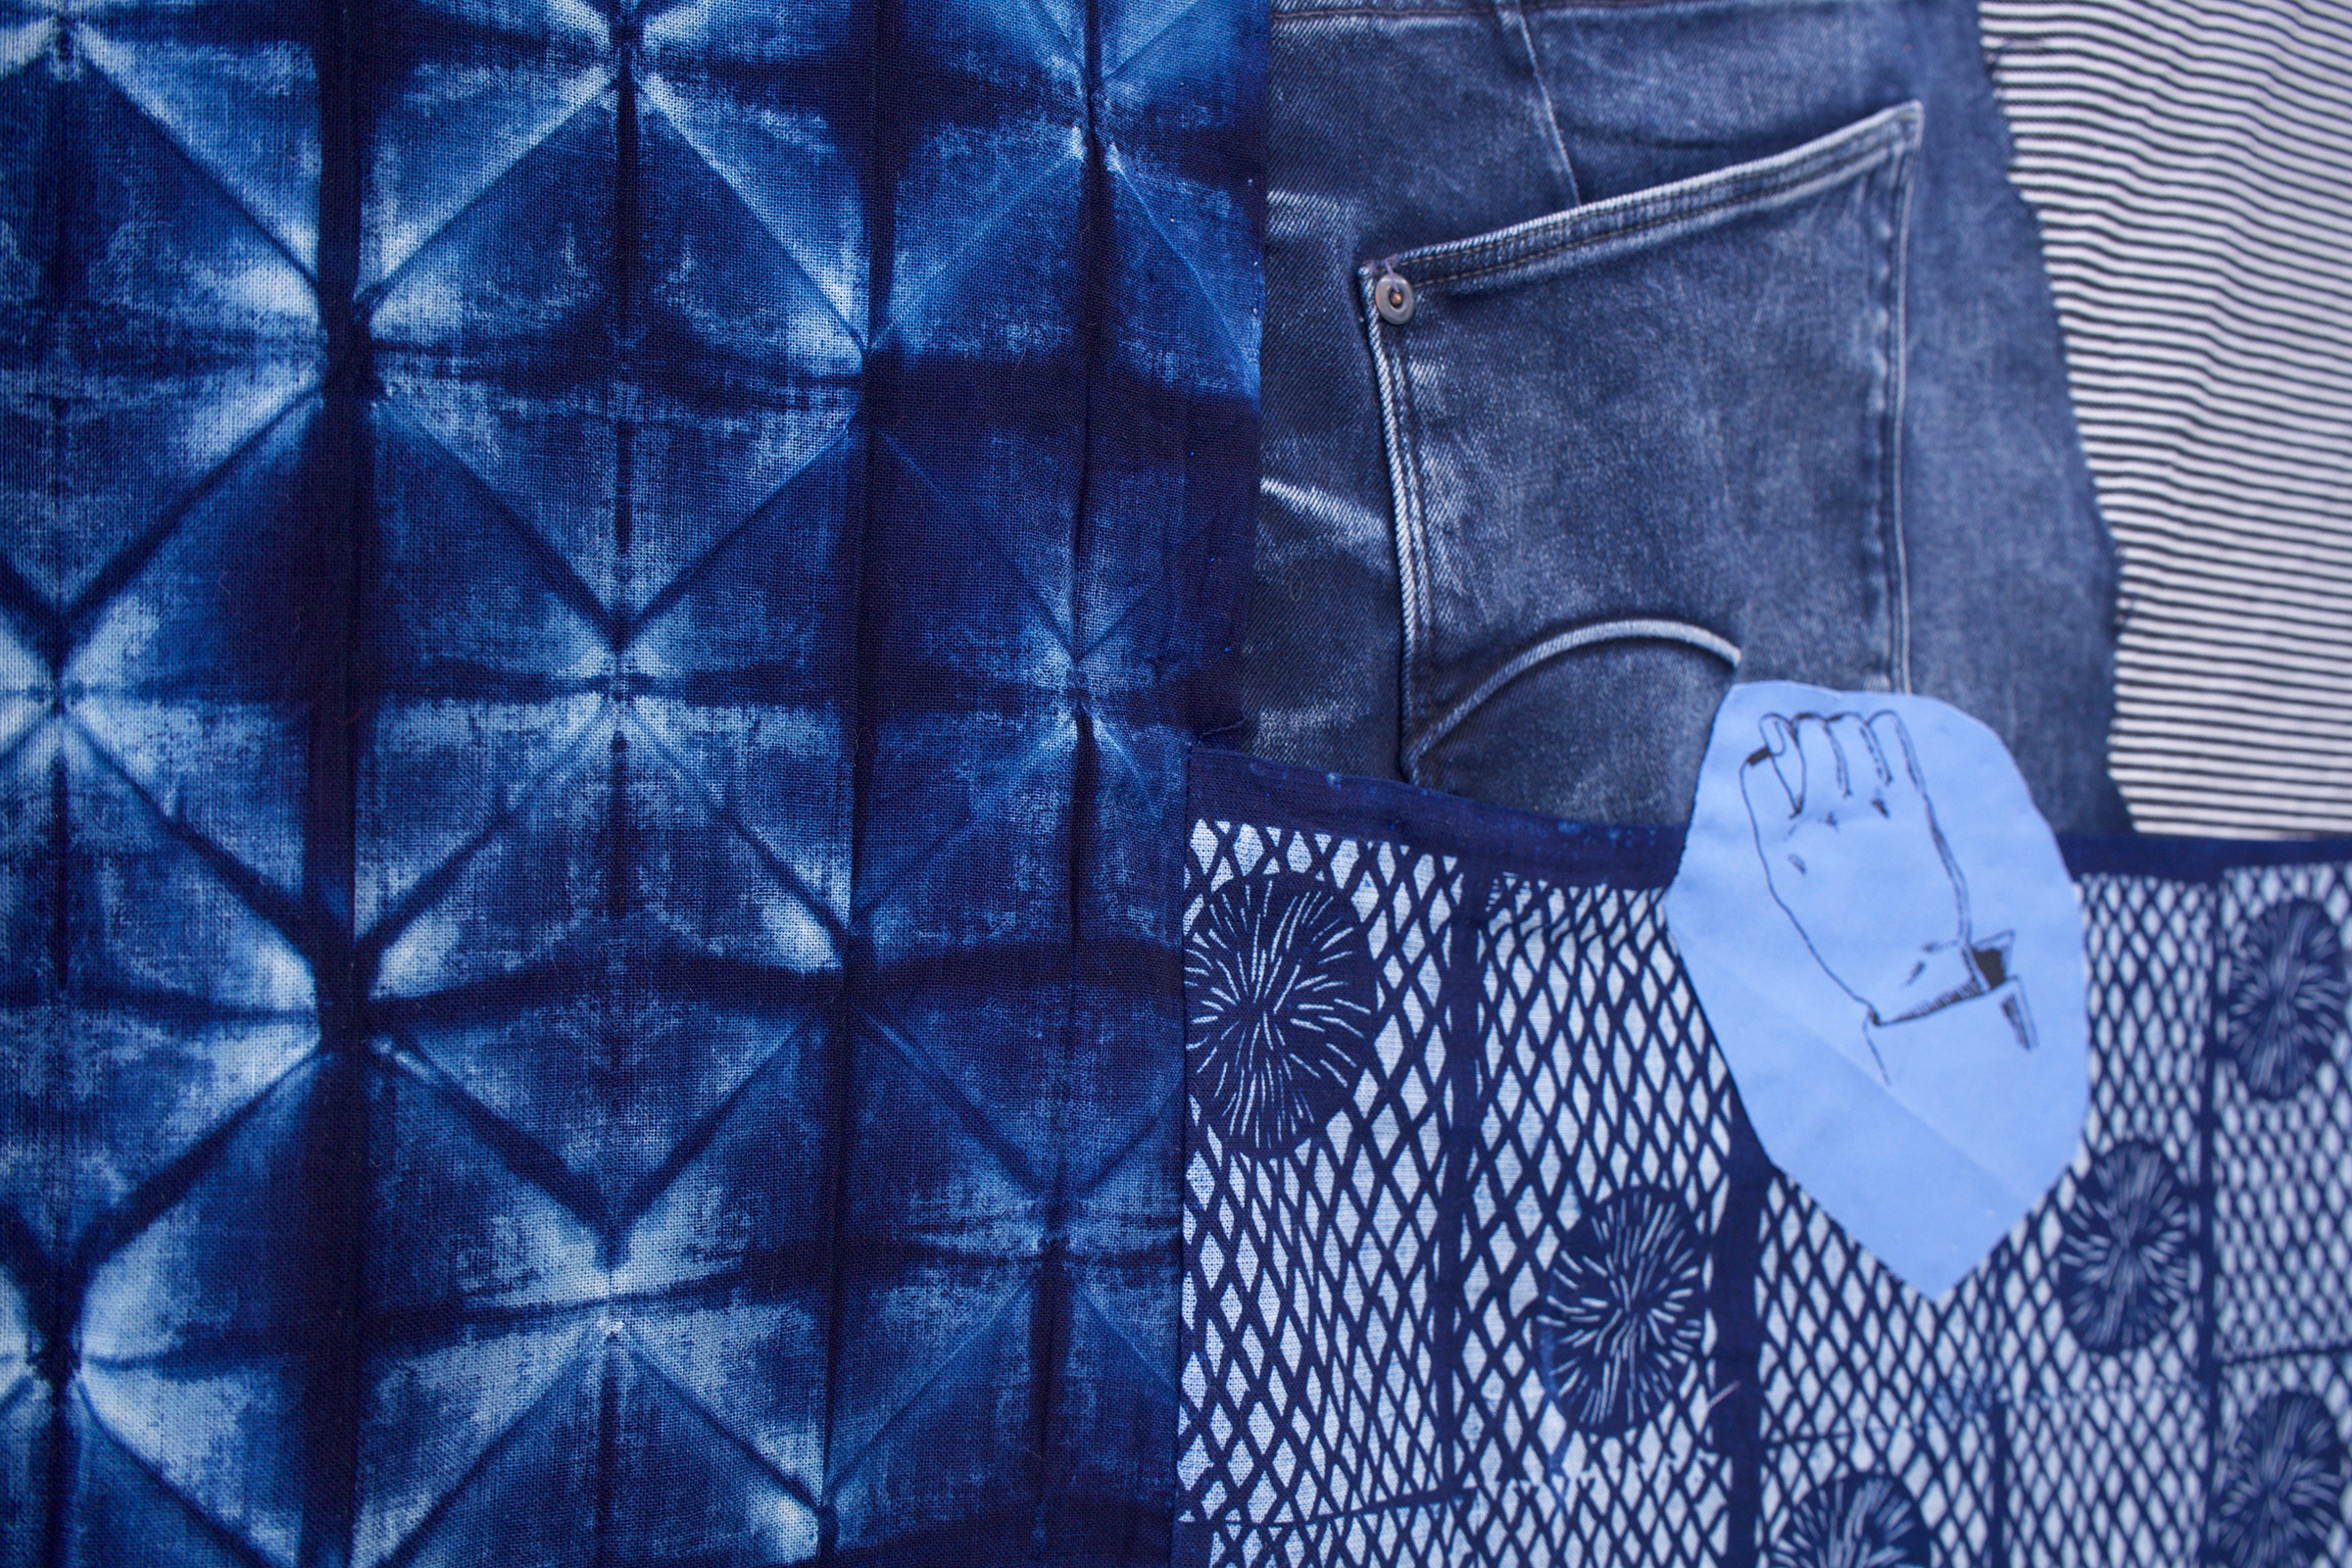  AMANDA CURRERI (detail) Homo-Hime, 2018 Hand-dyed and hand-printed fabrics with indigo, madder, soot/soya, acrylic on various fabrics such as used tablecloths, vintage Japanese silk, Japanese denim (new), deconstructed denim jeans, dog toy eyes, dig